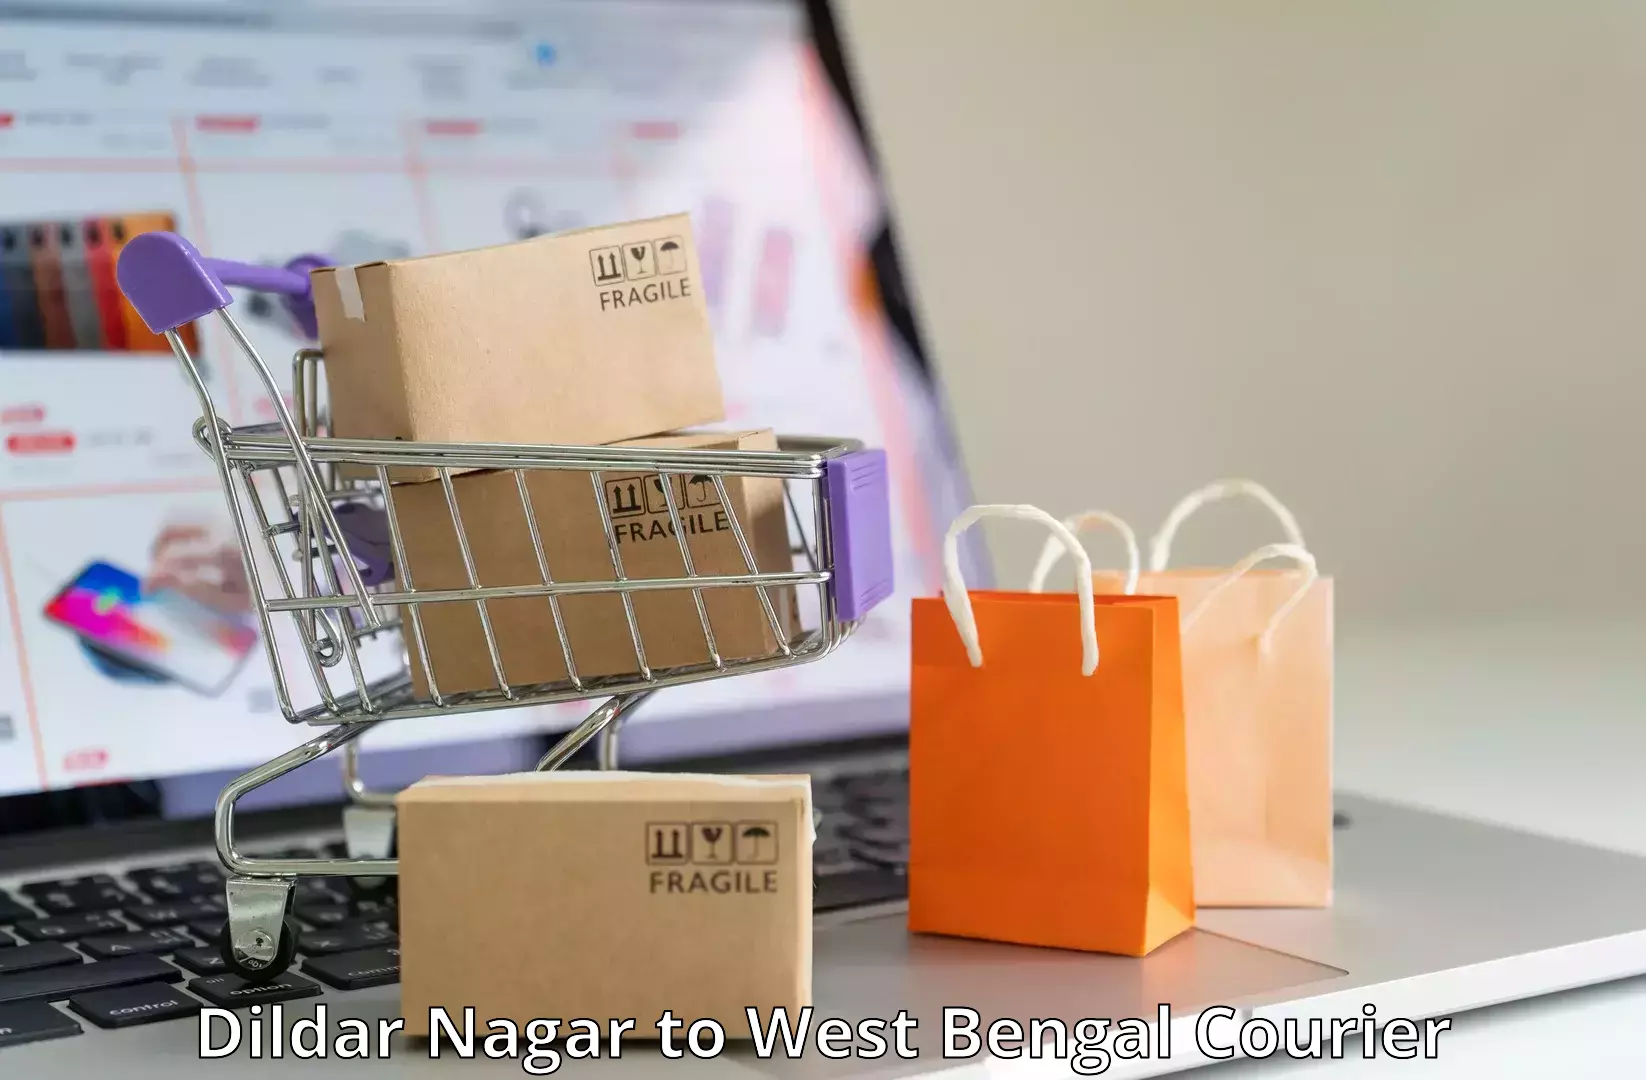 Courier service booking in Dildar Nagar to Domkal